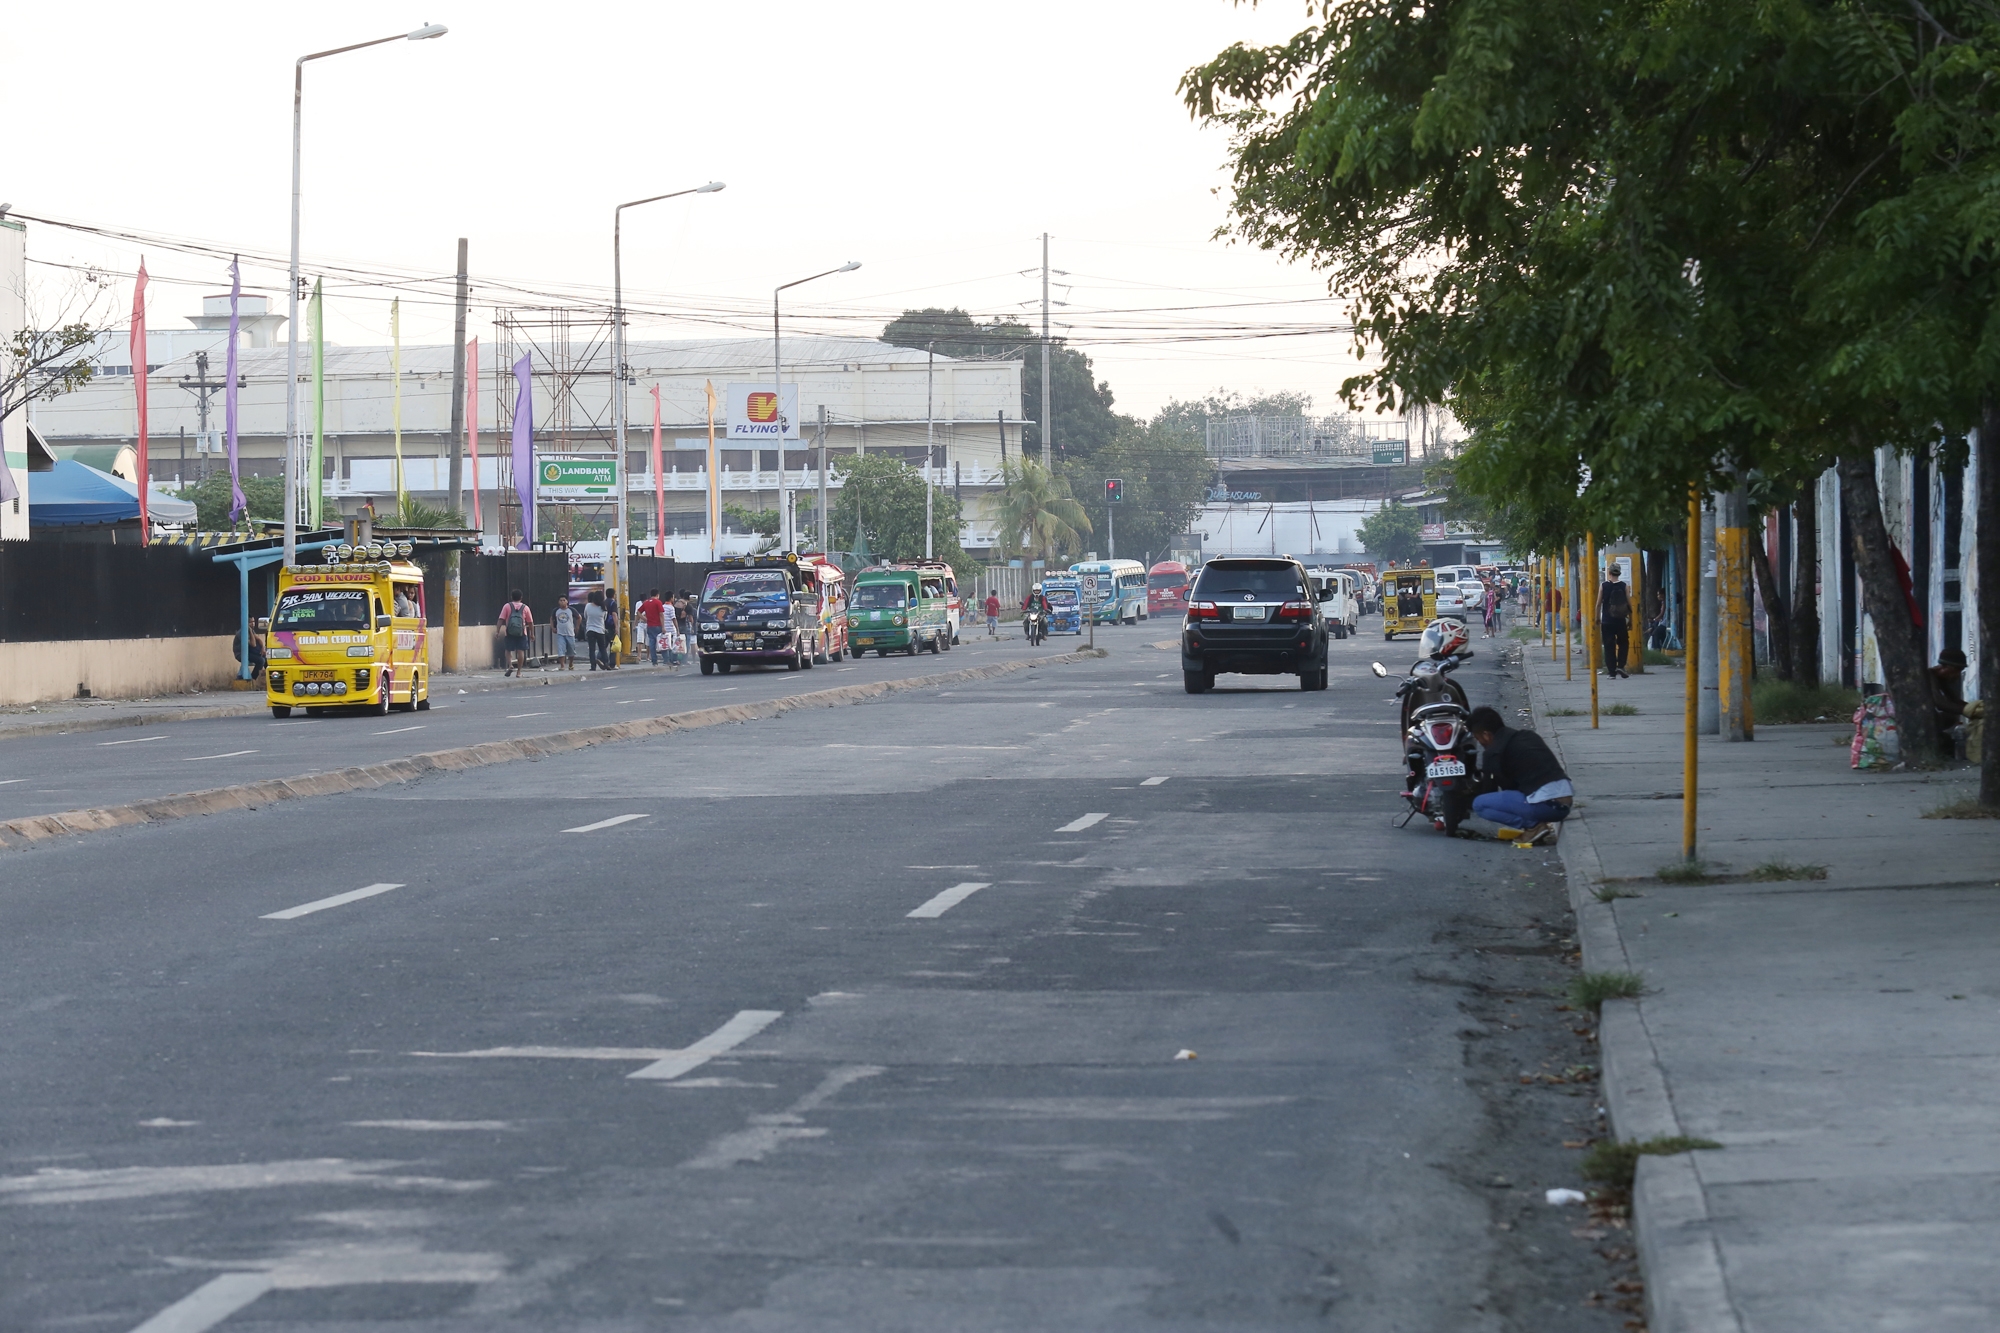 Motorist are advised that A. Soriano St. will be a one-way street starting tomorrow to give way to a concrete project.